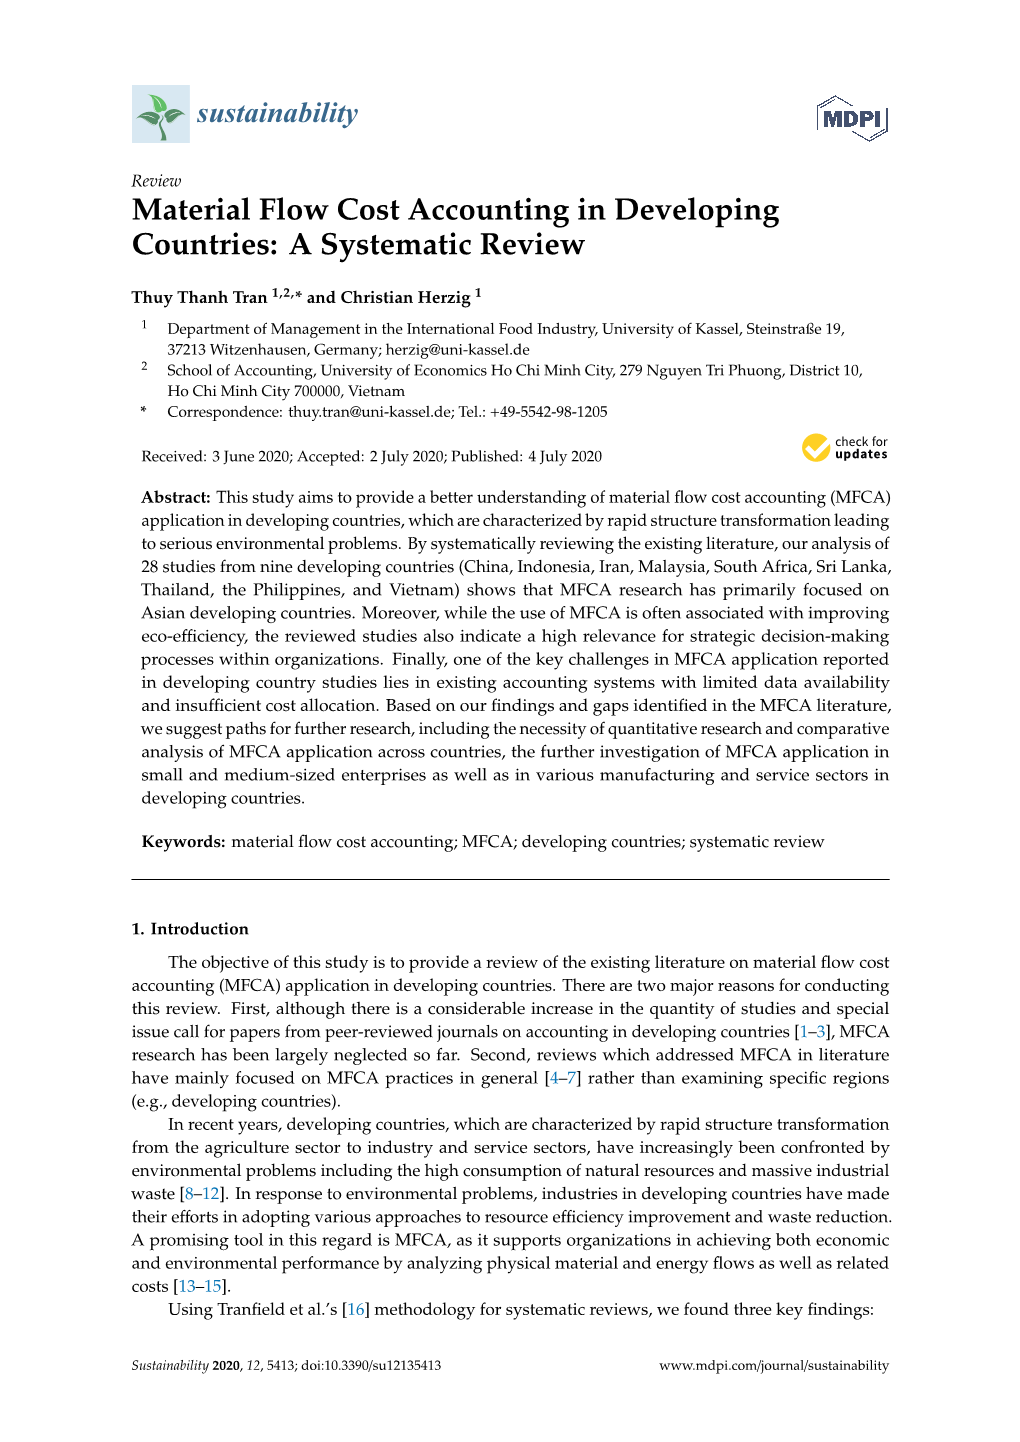 Material Flow Cost Accounting in Developing Countries: a Systematic Review